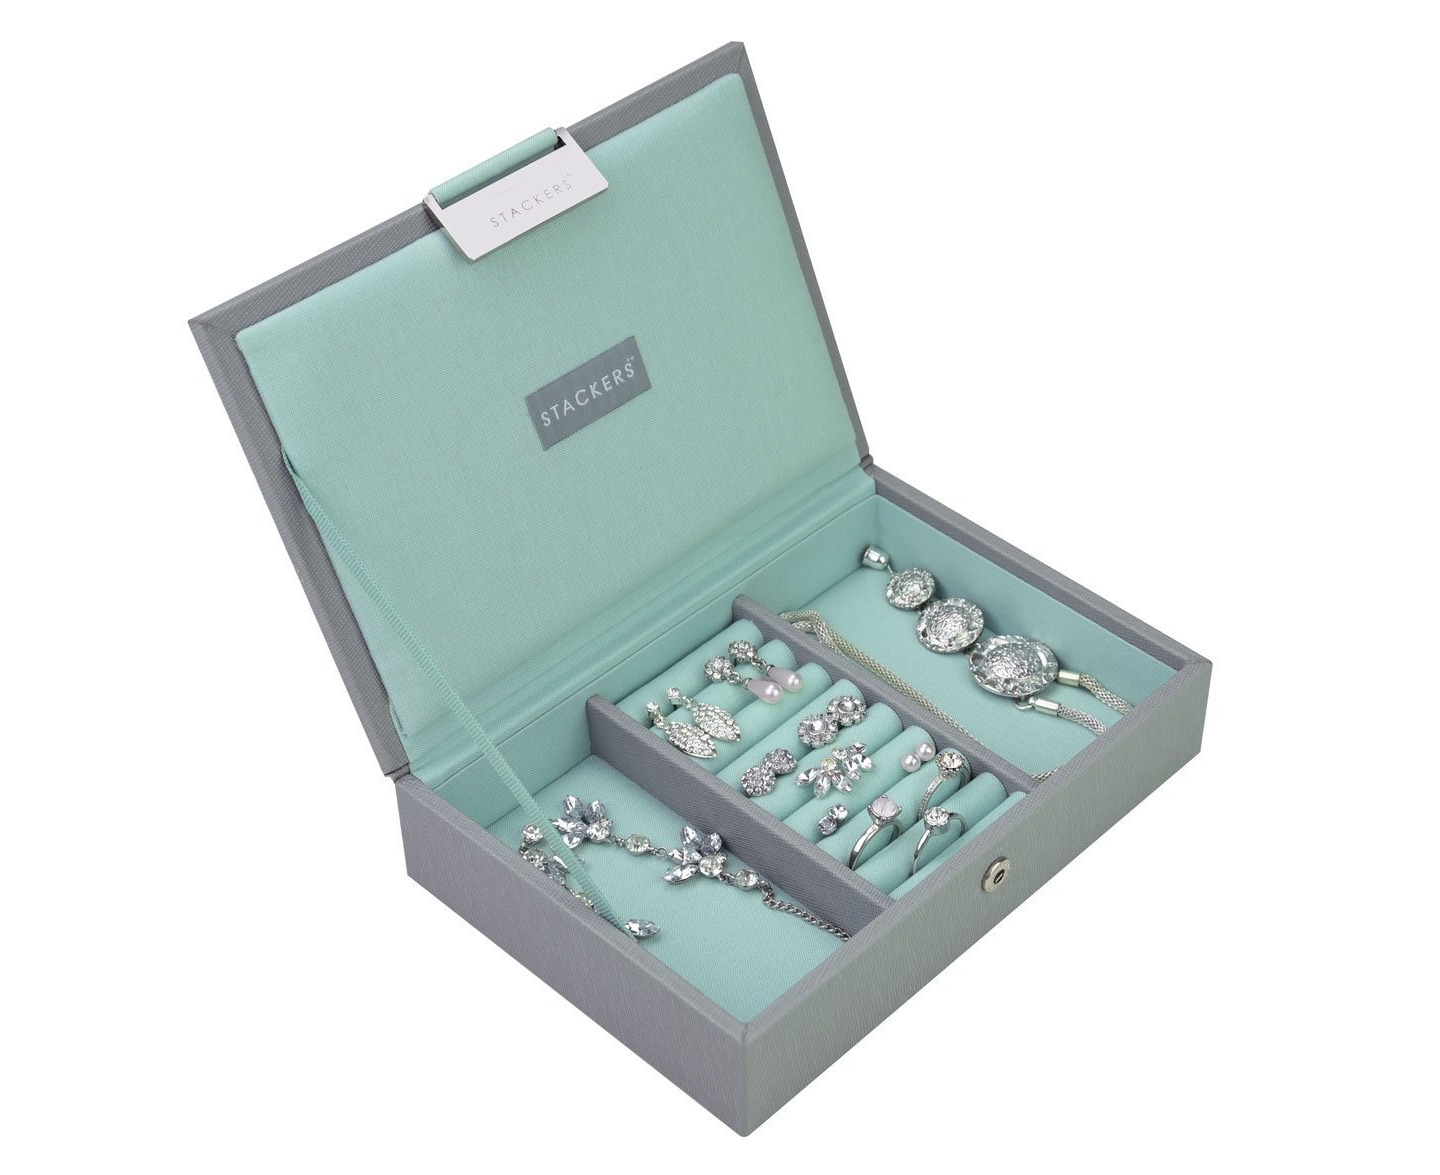 Stackers by LC Designs STACKERS CLASSIC SIZE Dove Grey Lidded STACKER Jewellery Box with Mint Green Lining. 